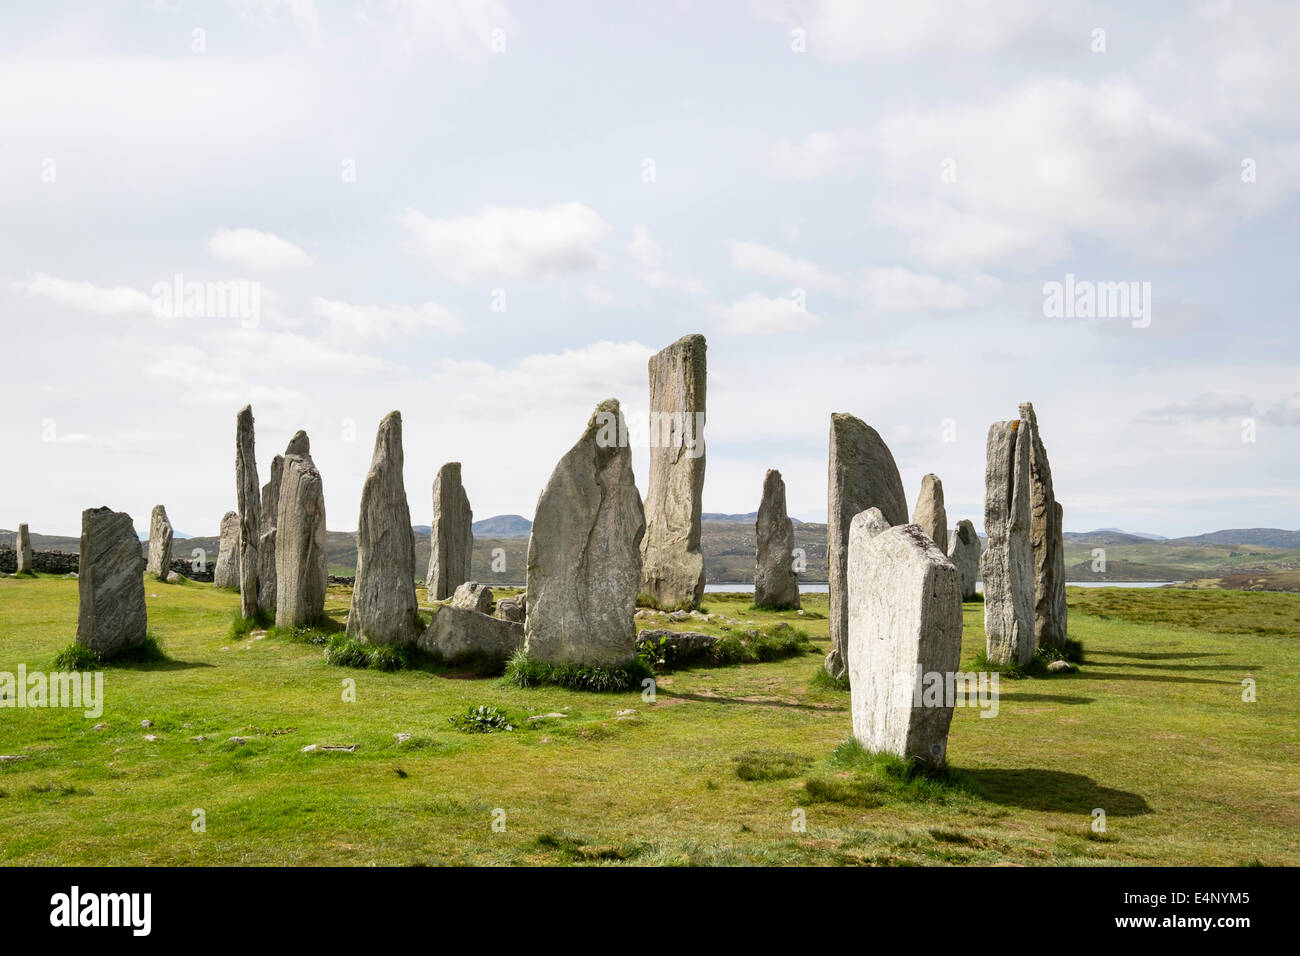 Callanish Stone Circle Neolithic standing stones from 4500 BC Calanais Isle of Lewis Outer Hebrides Western Isles Scotland UK Stock Photo